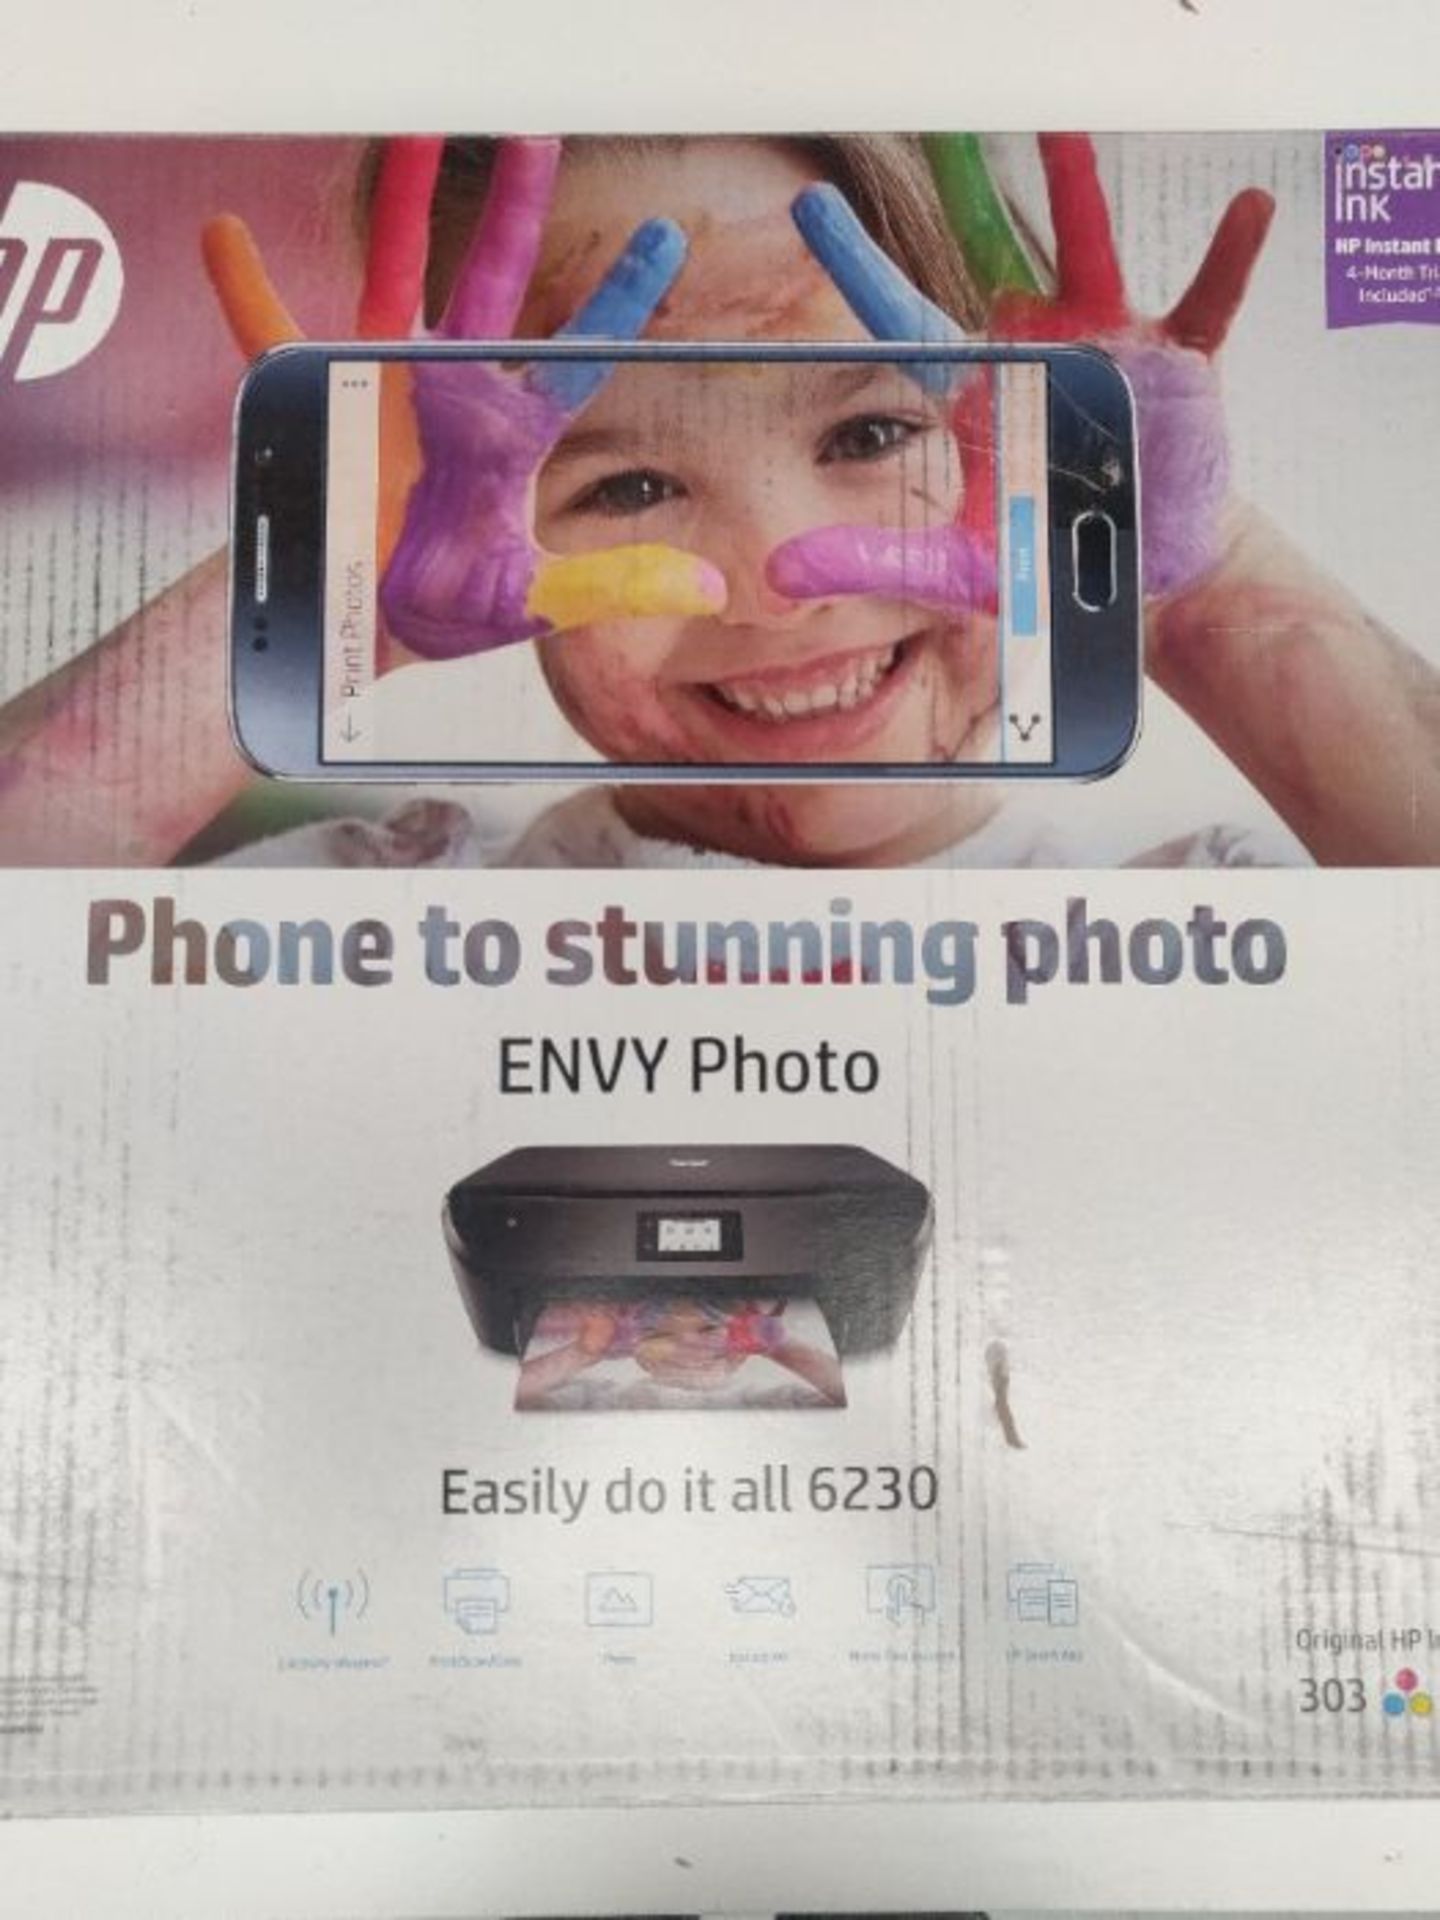 RRP £79.00 HP Envy Photo 6230 All-in-One Wi-Fi Photo Printer with 4 Months of Instant Ink Include - Image 2 of 3